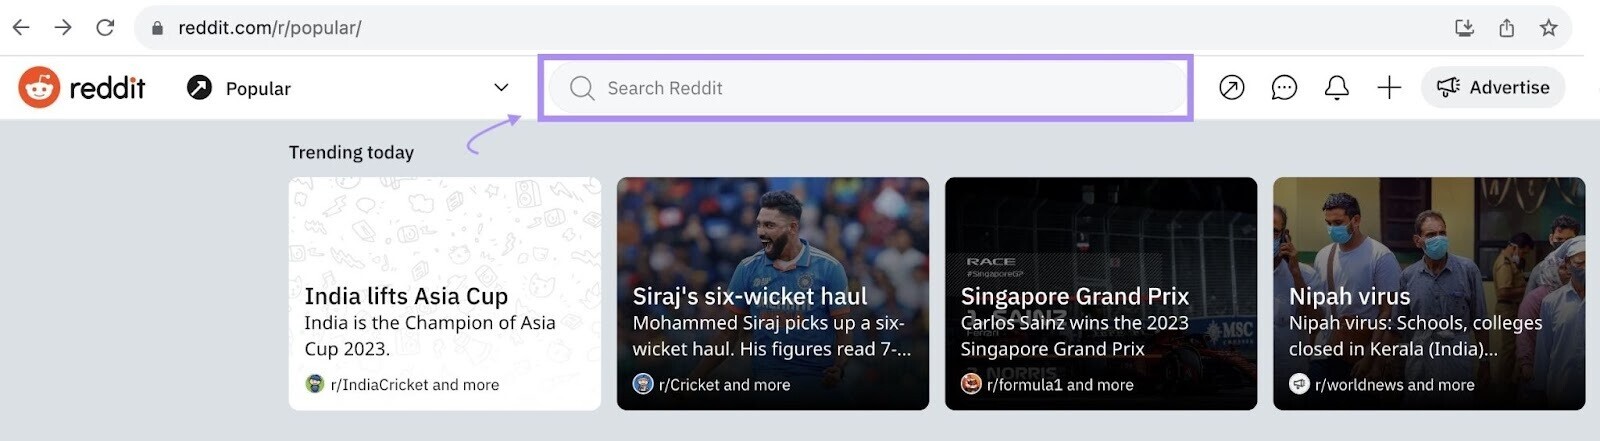 “Search Reddit” bar at the top of the page